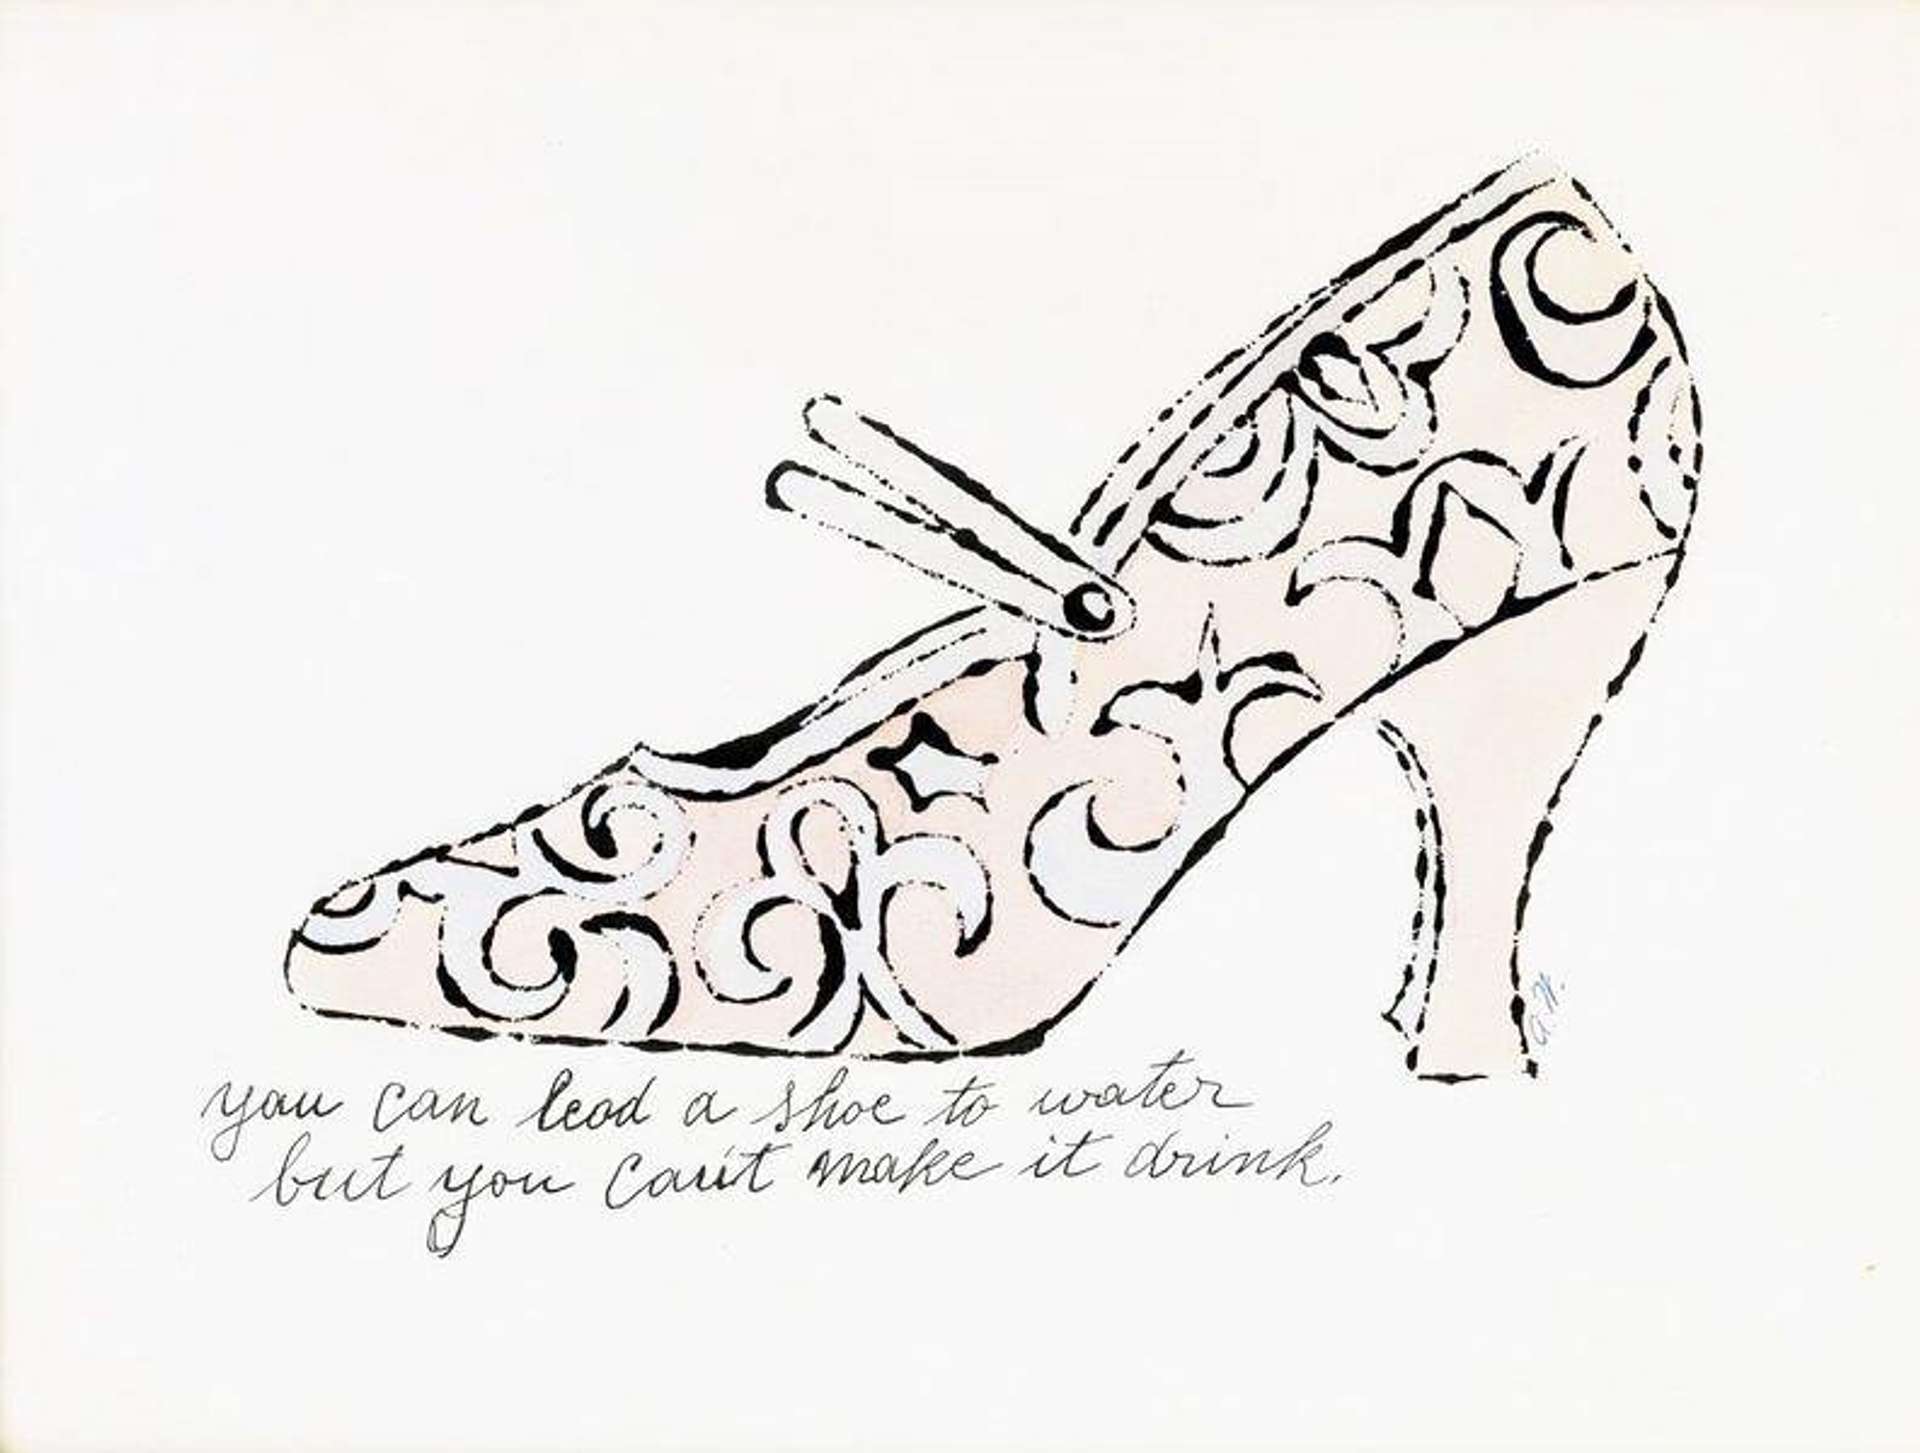 A peachy pink high heel with white paisley designs adorning it, and a double strap crosses the top. Beneath the shoe, the altered saying “you can lead a shoe to water but you can’t make it drink.” has been inscribed in a lower-case cursive hand. The same hand has initialed “a.w.” on the outside of the heel.